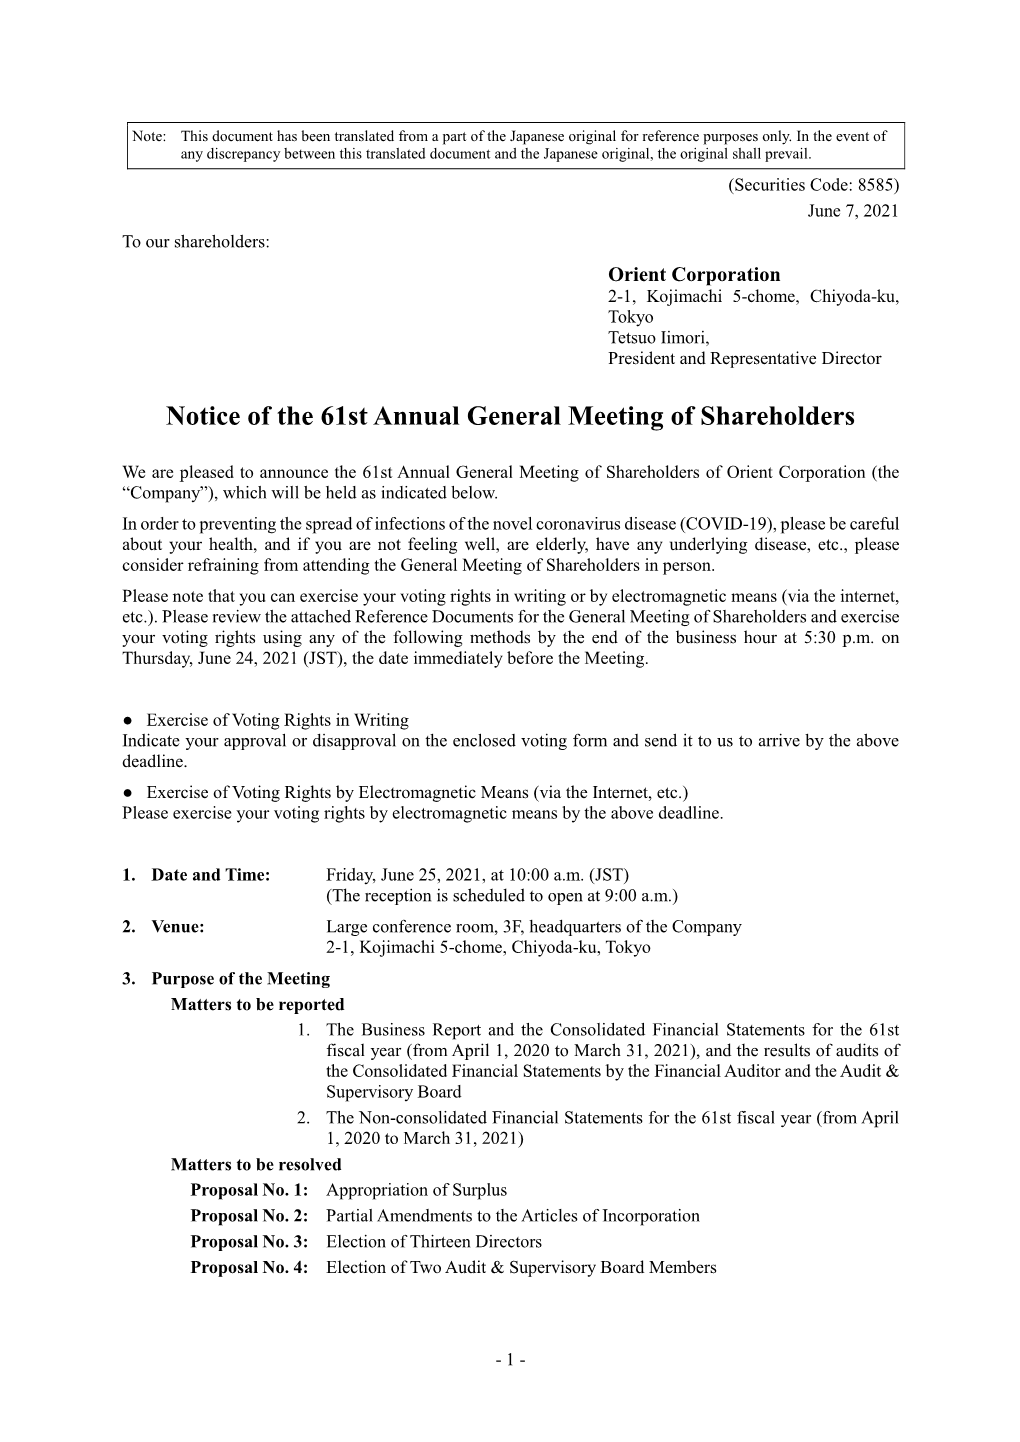 Notice of the 61St Annual General Meeting of Shareholders